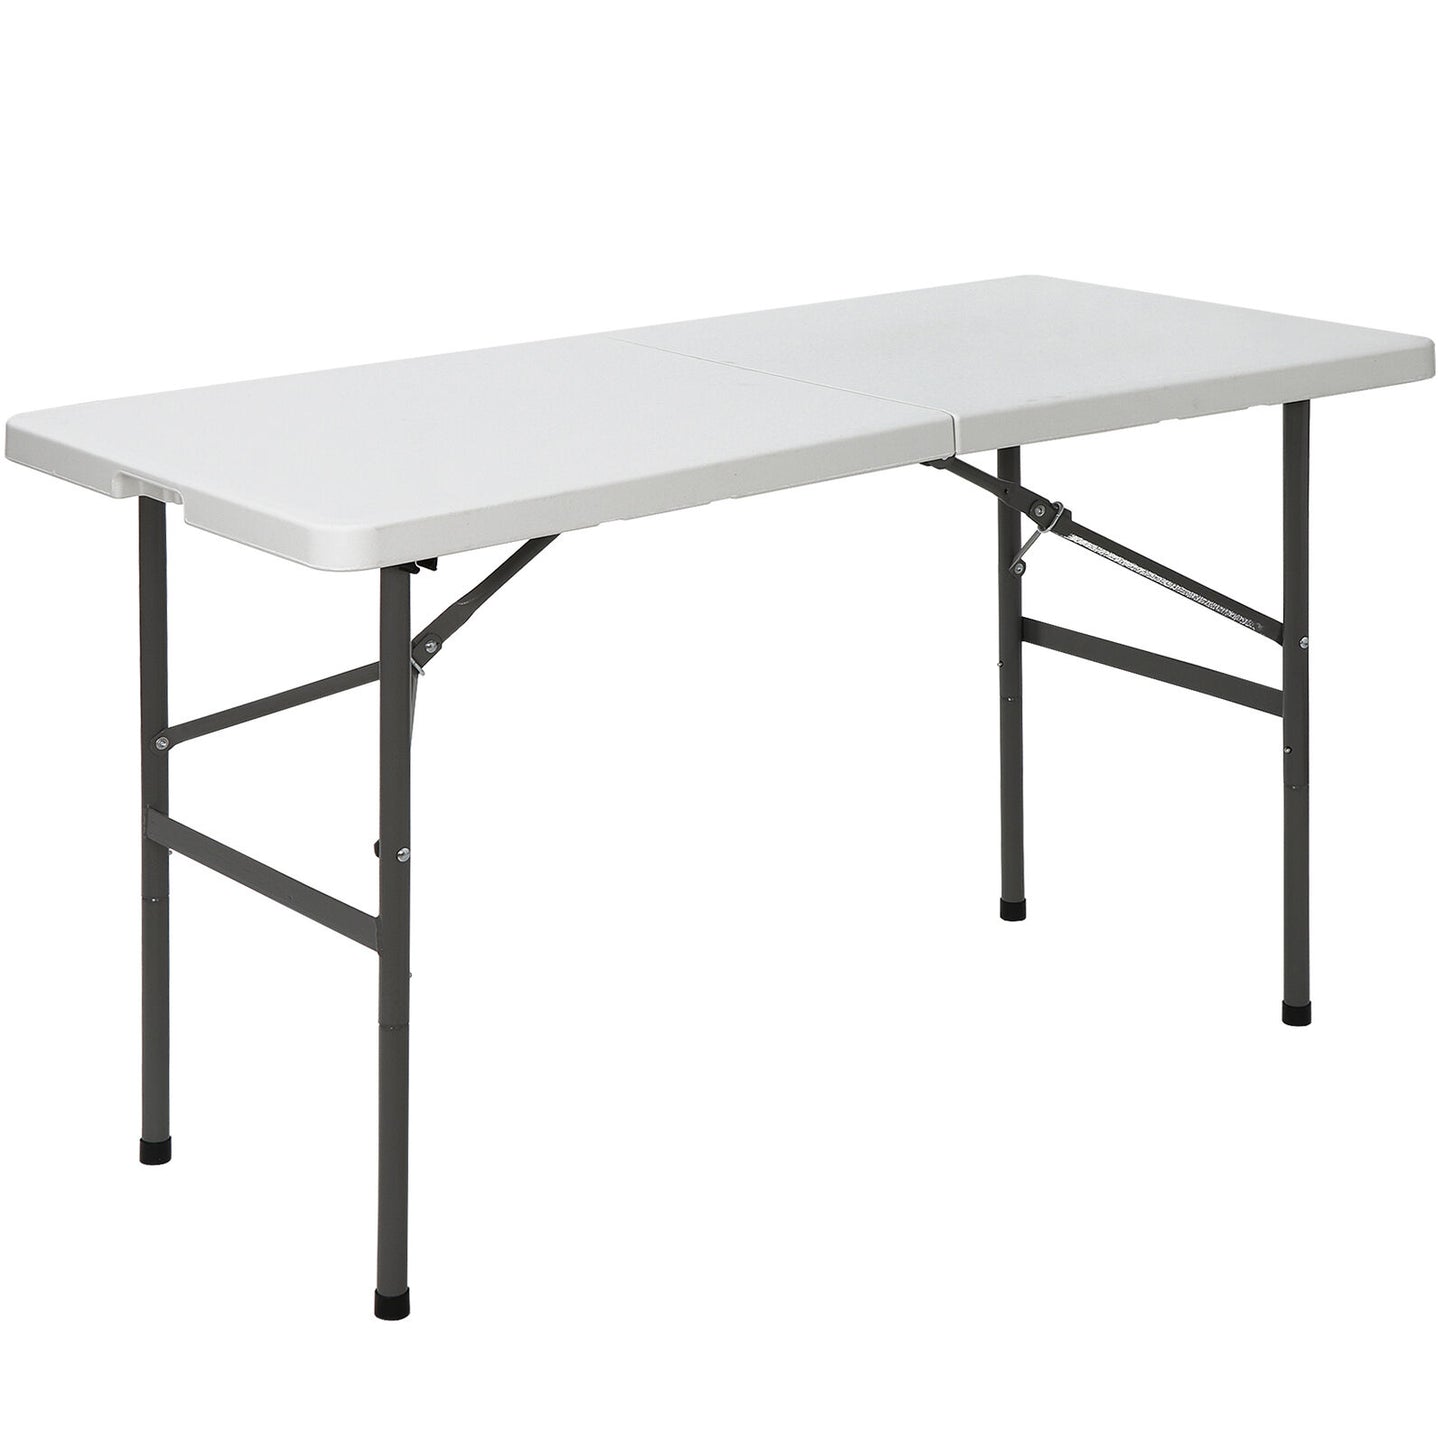 4 FT Foldable Portable Plastic Table In/Outdoor Picnic Desk for Picnic Camping